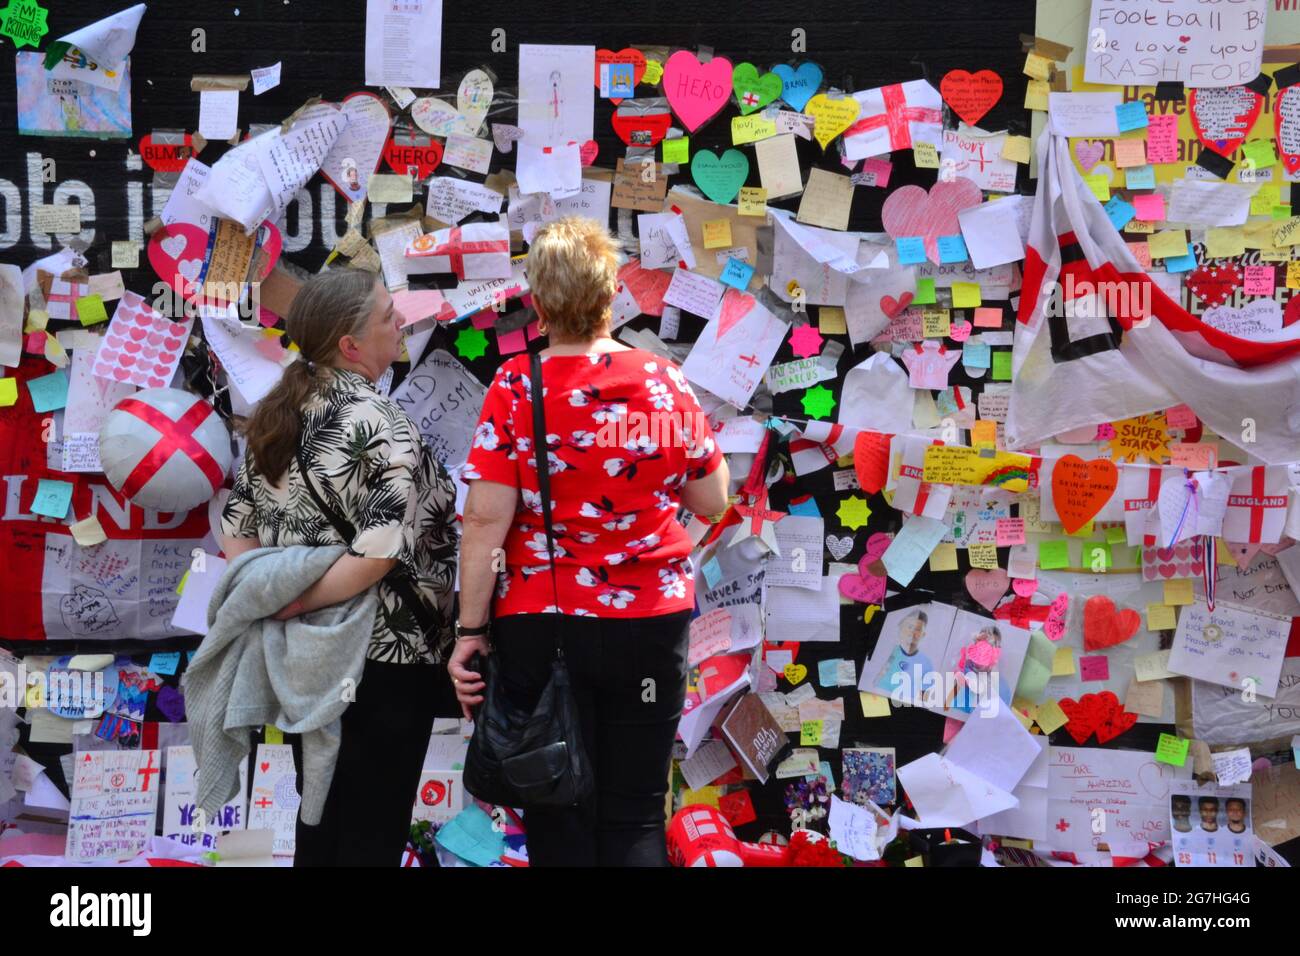 People leave flowers and hundreds of supportive notes, pictures, flags and anti racist messages on the giant  Manchester United player  Marcus Rashford mural in Withington, Manchester, England, United Kingdom, that was vandalised  with abusive graffiti after England's Euro2020 football loss on July 11th, 2021. The mural was created by French-born street artist Akse P19 on the wall of the Coffee House Cafe on Copson Street. People have left thousands of supportive notes, pictures, flags, flowers  and anti racist messages following the defacement. Stock Photo